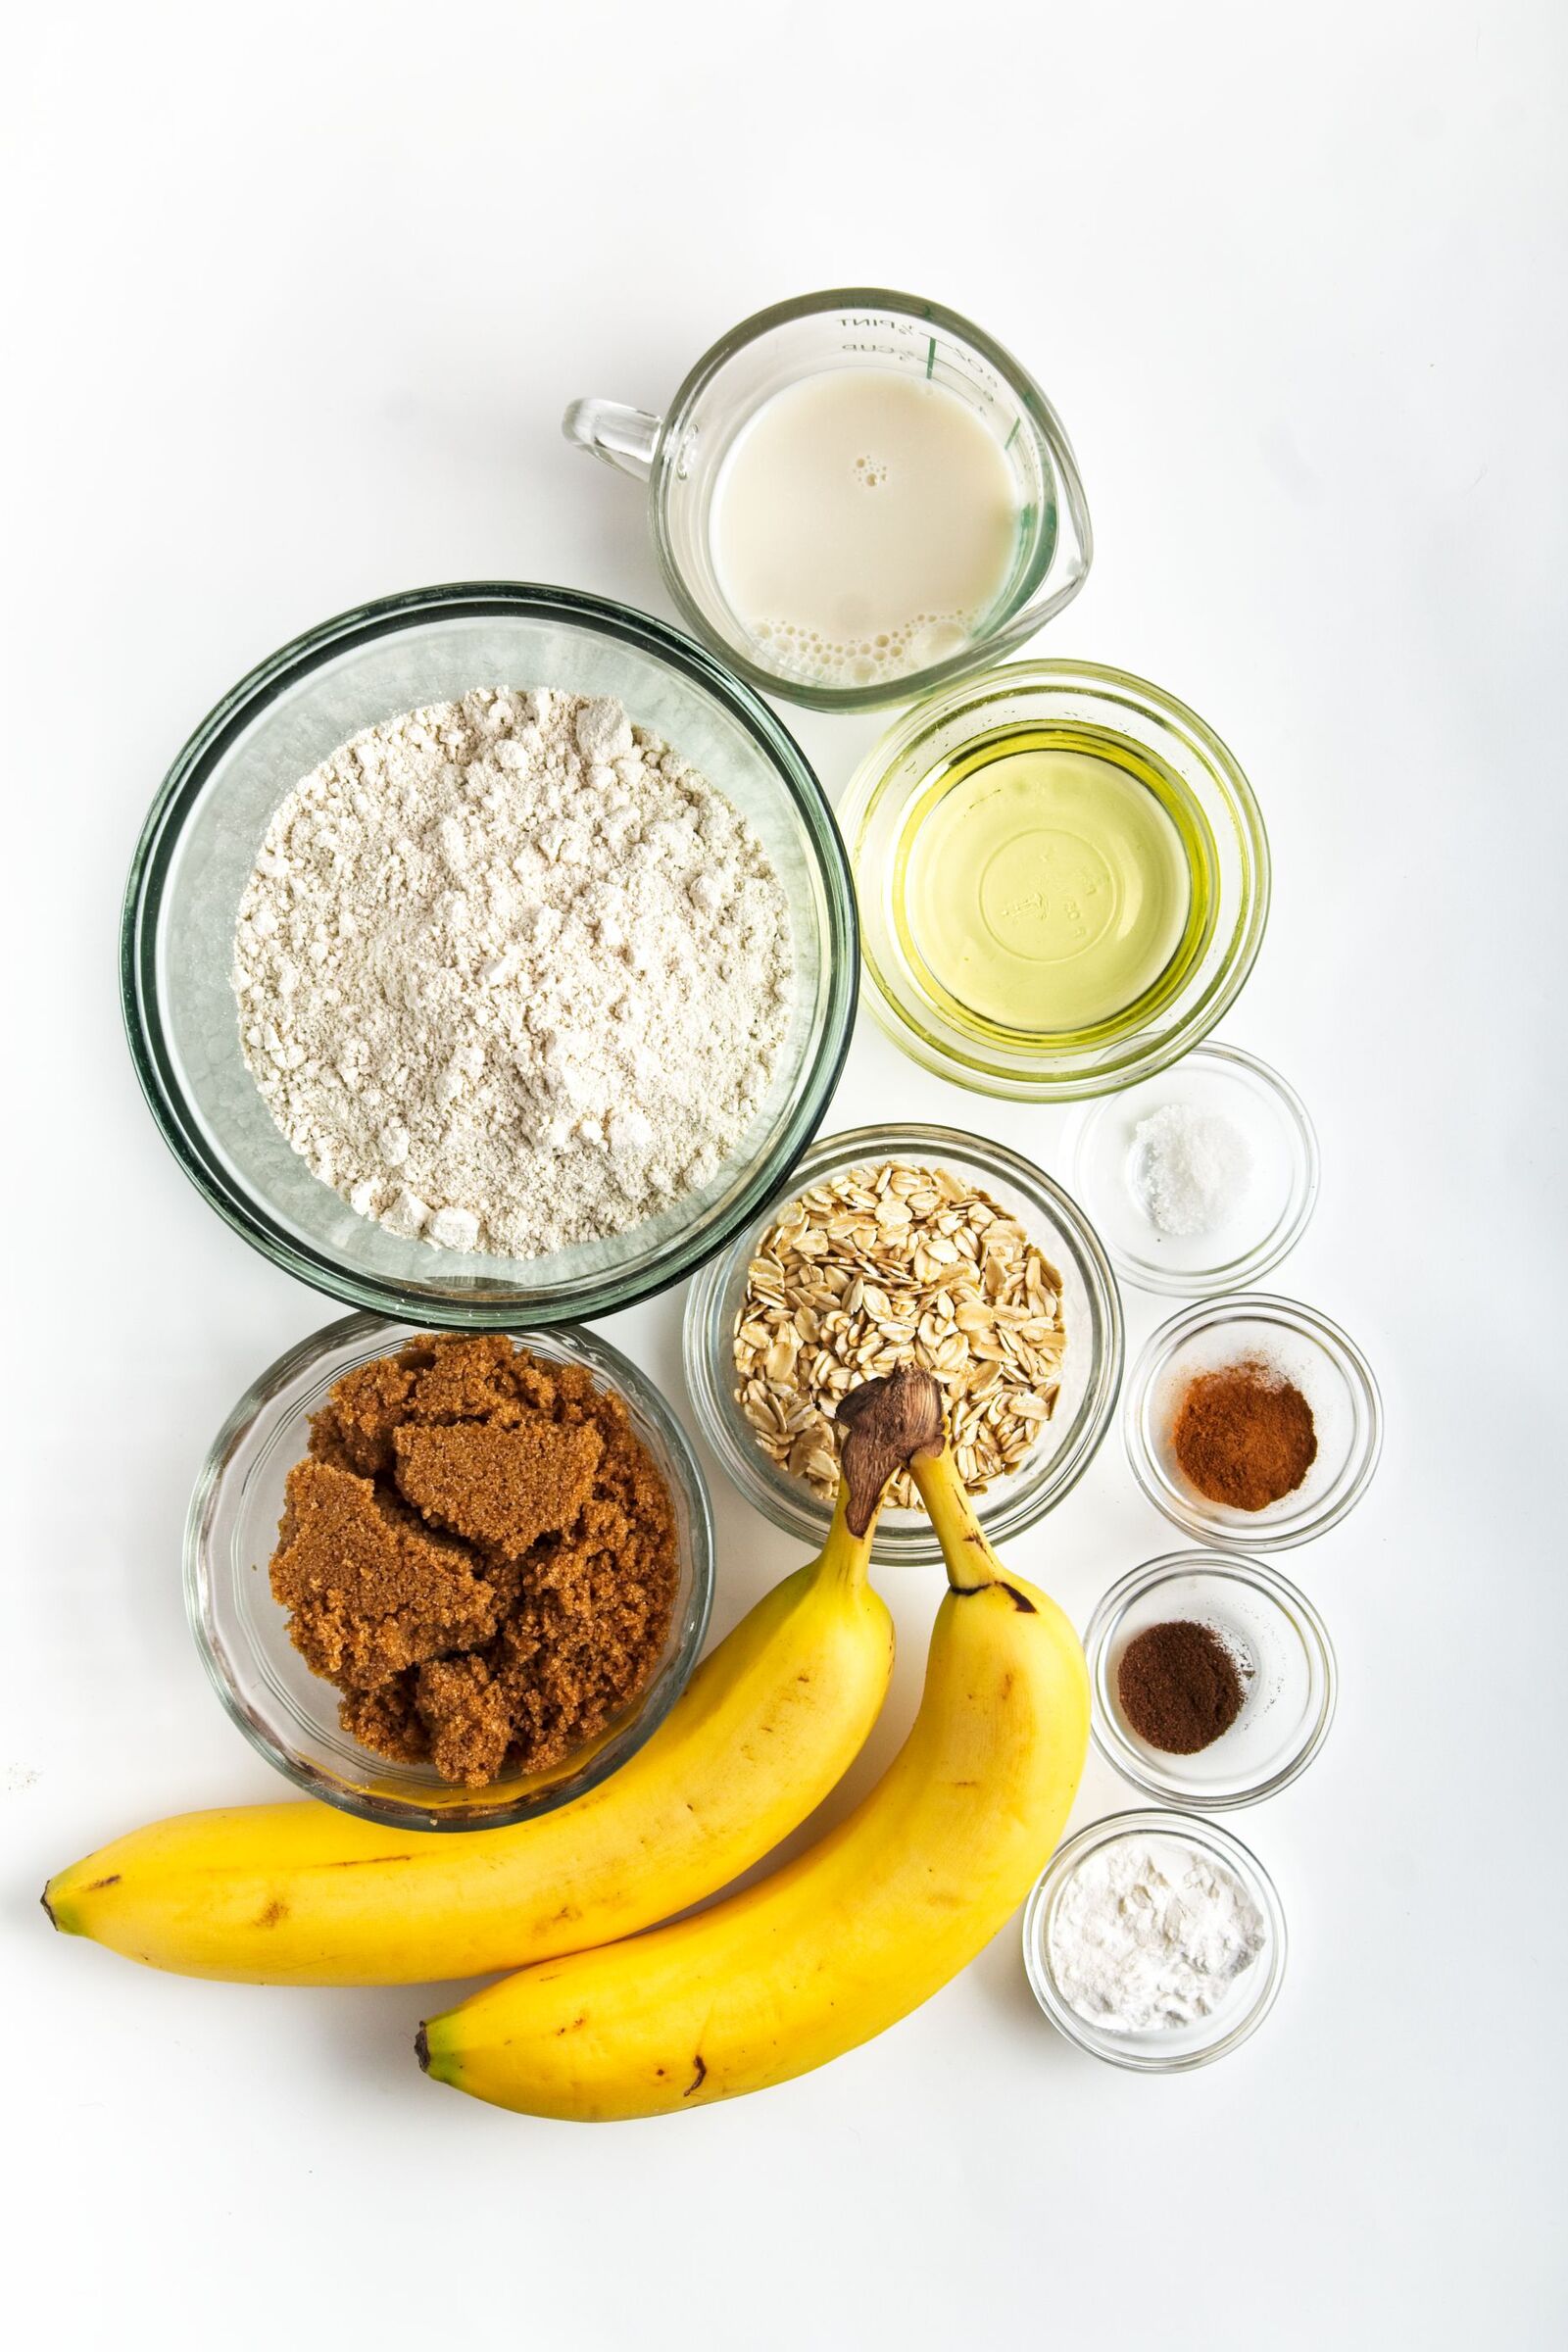 Oat Flour Banana Muffin ingredients in bowls.